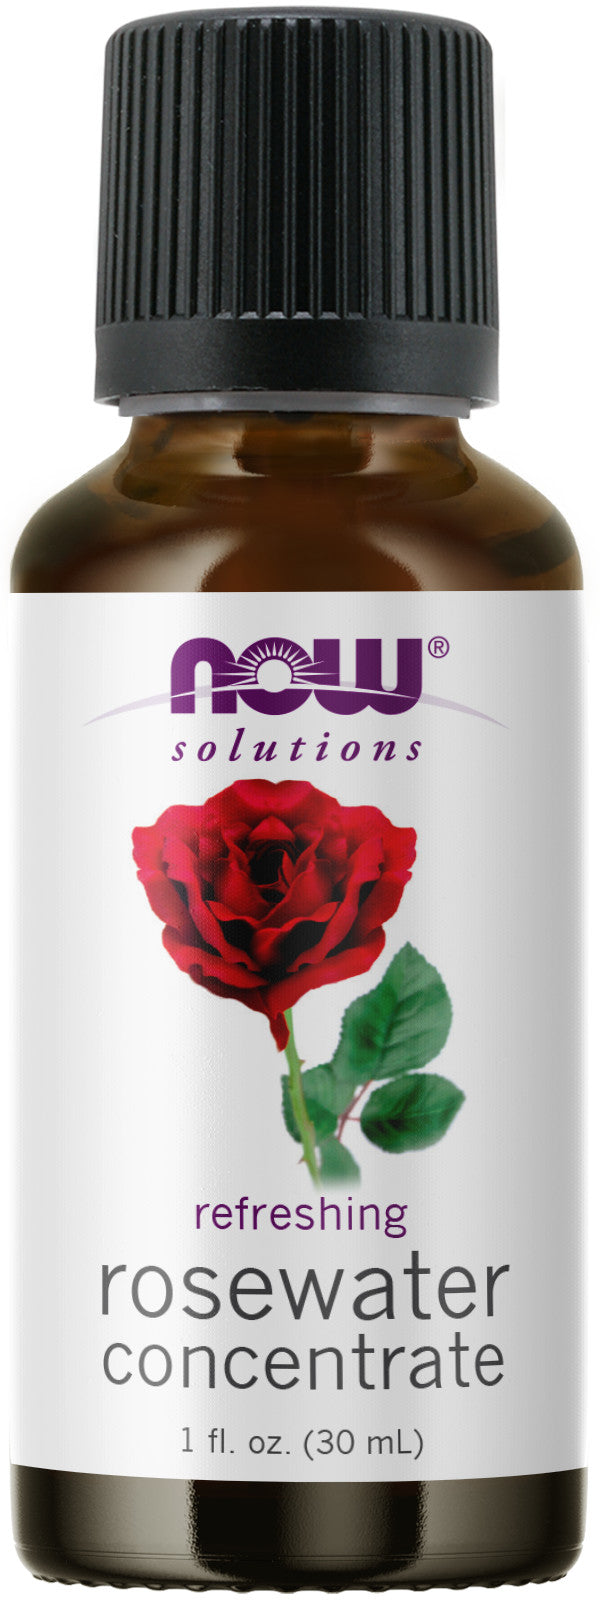 Now Solutions - Rosewater Concentrate 1 fl oz (30 ml)